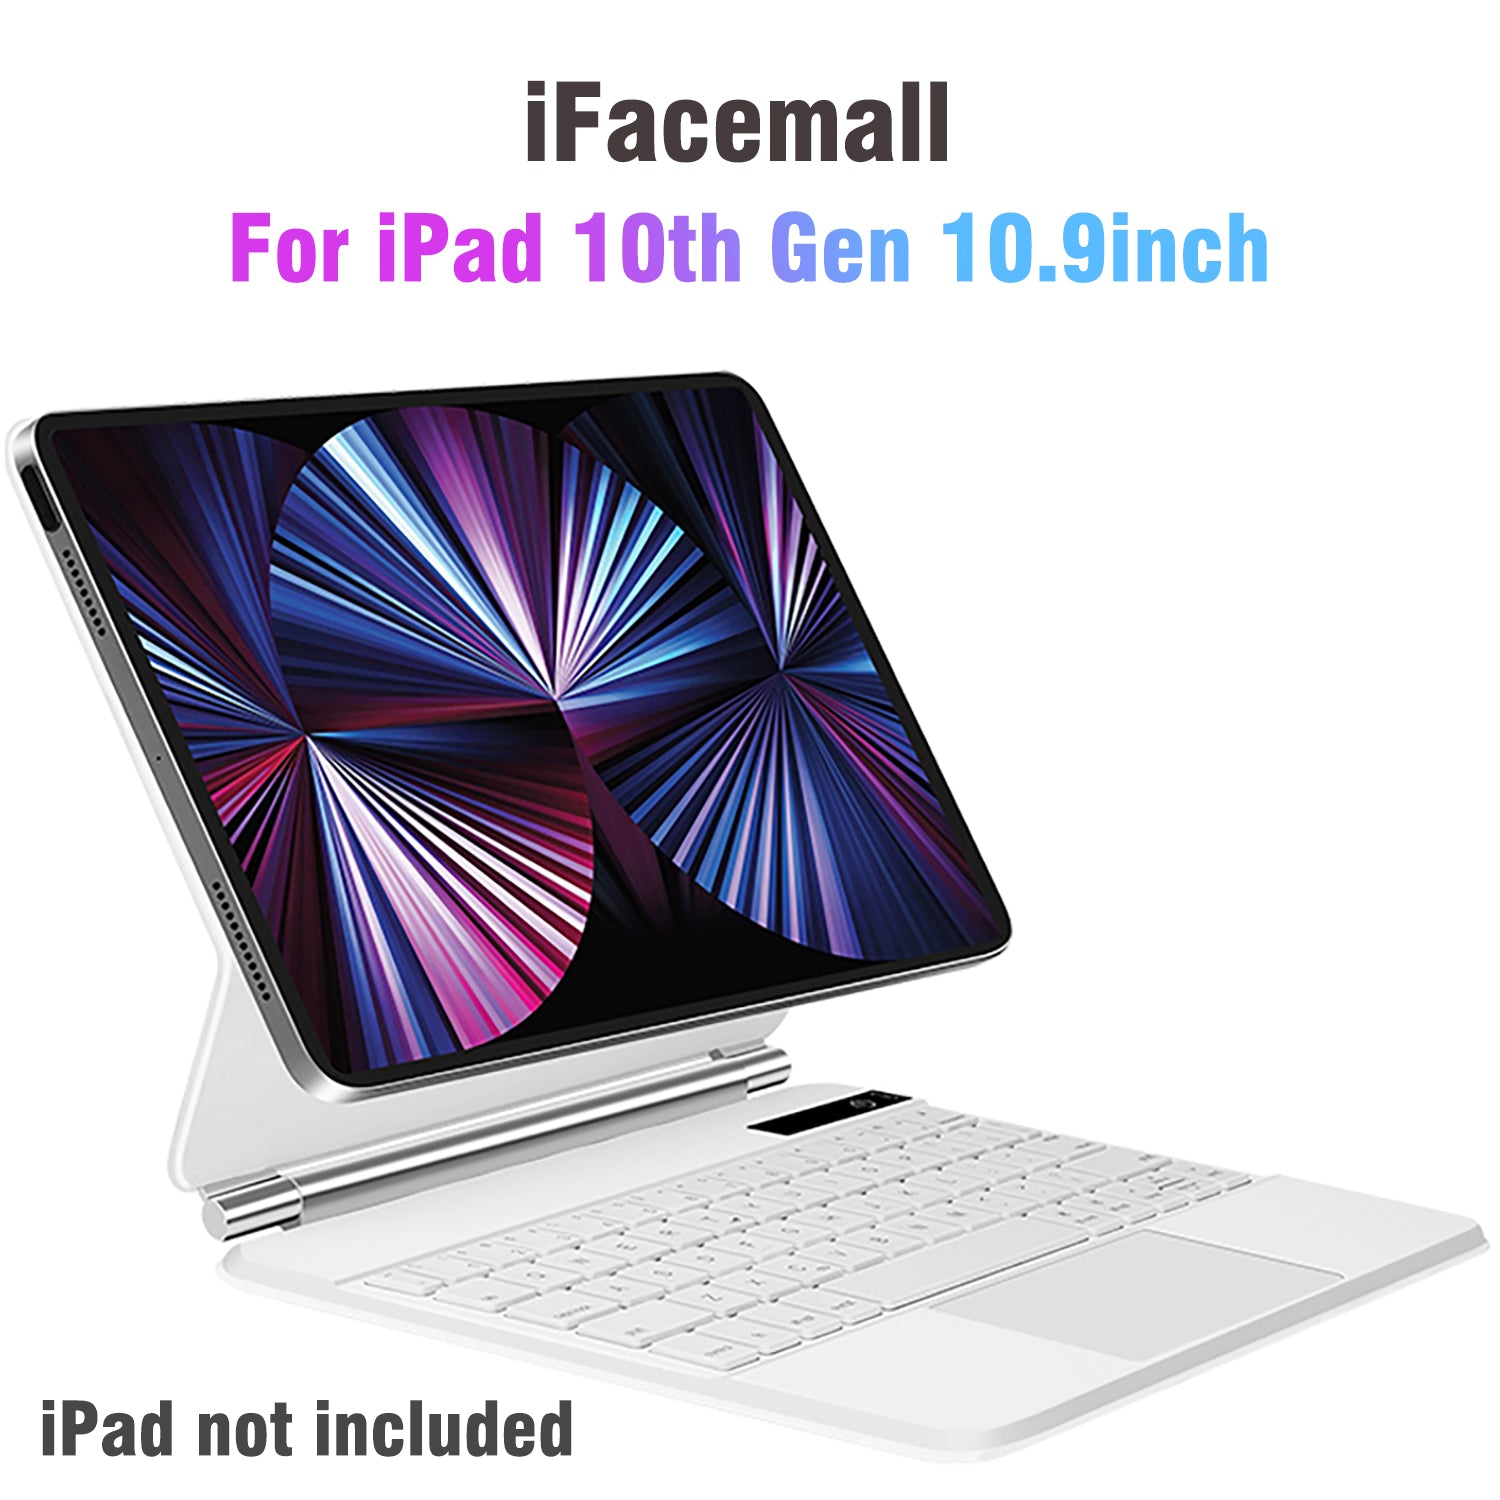 iFacemall Stylish Magic Case for iPad with Keyboard